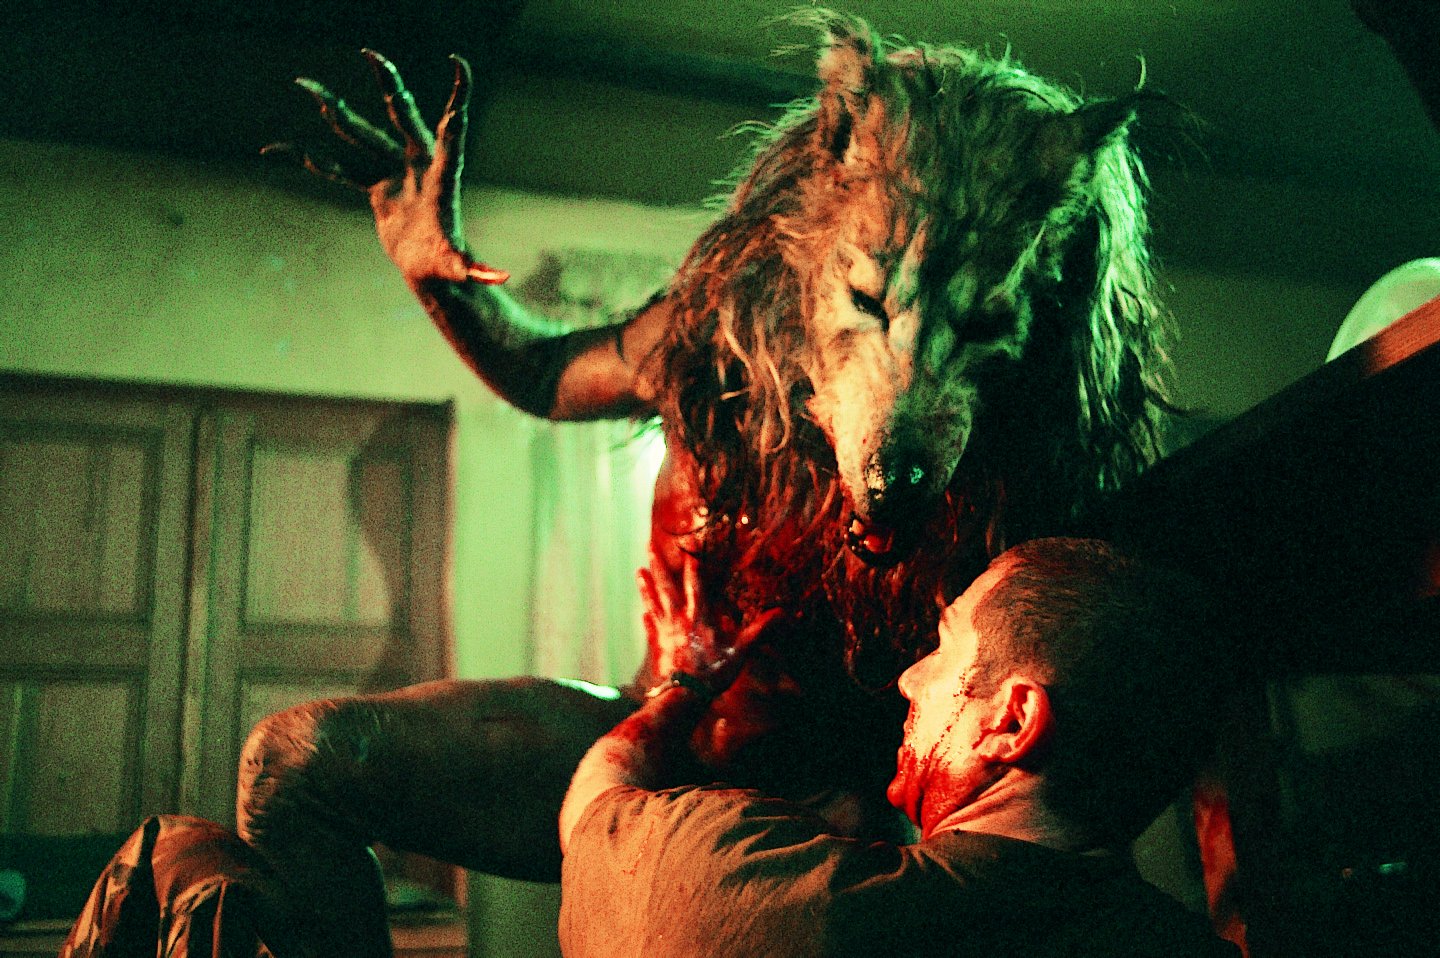 Dog Soldiers scream factory